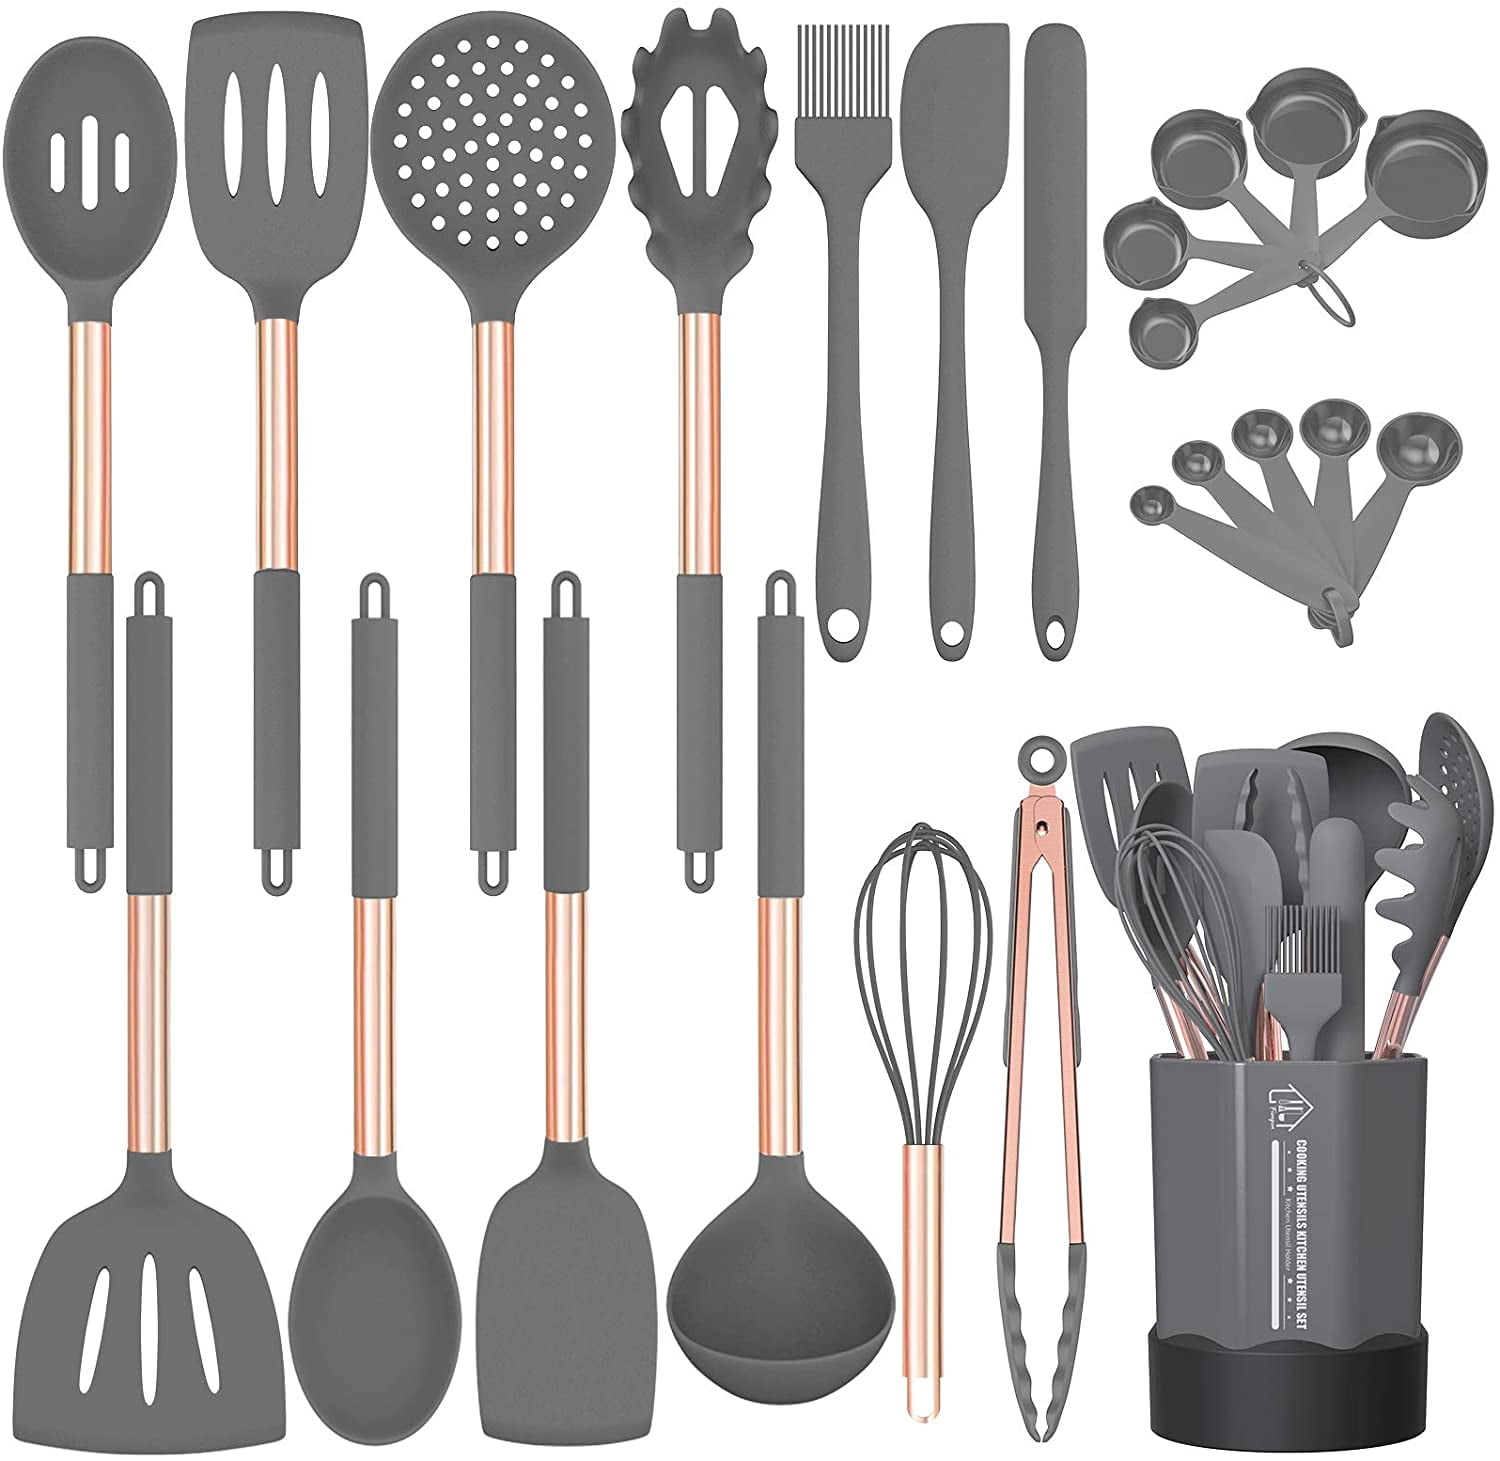 Heat Resistant Cookware Silicone Kitchen Tools Gift with Stainless Steel Handle Fungun Non-stick Kitchen Utensil 24 Pcs Cooking Utensils Set Blue-24pcs Silicone Cooking Utensil Set 